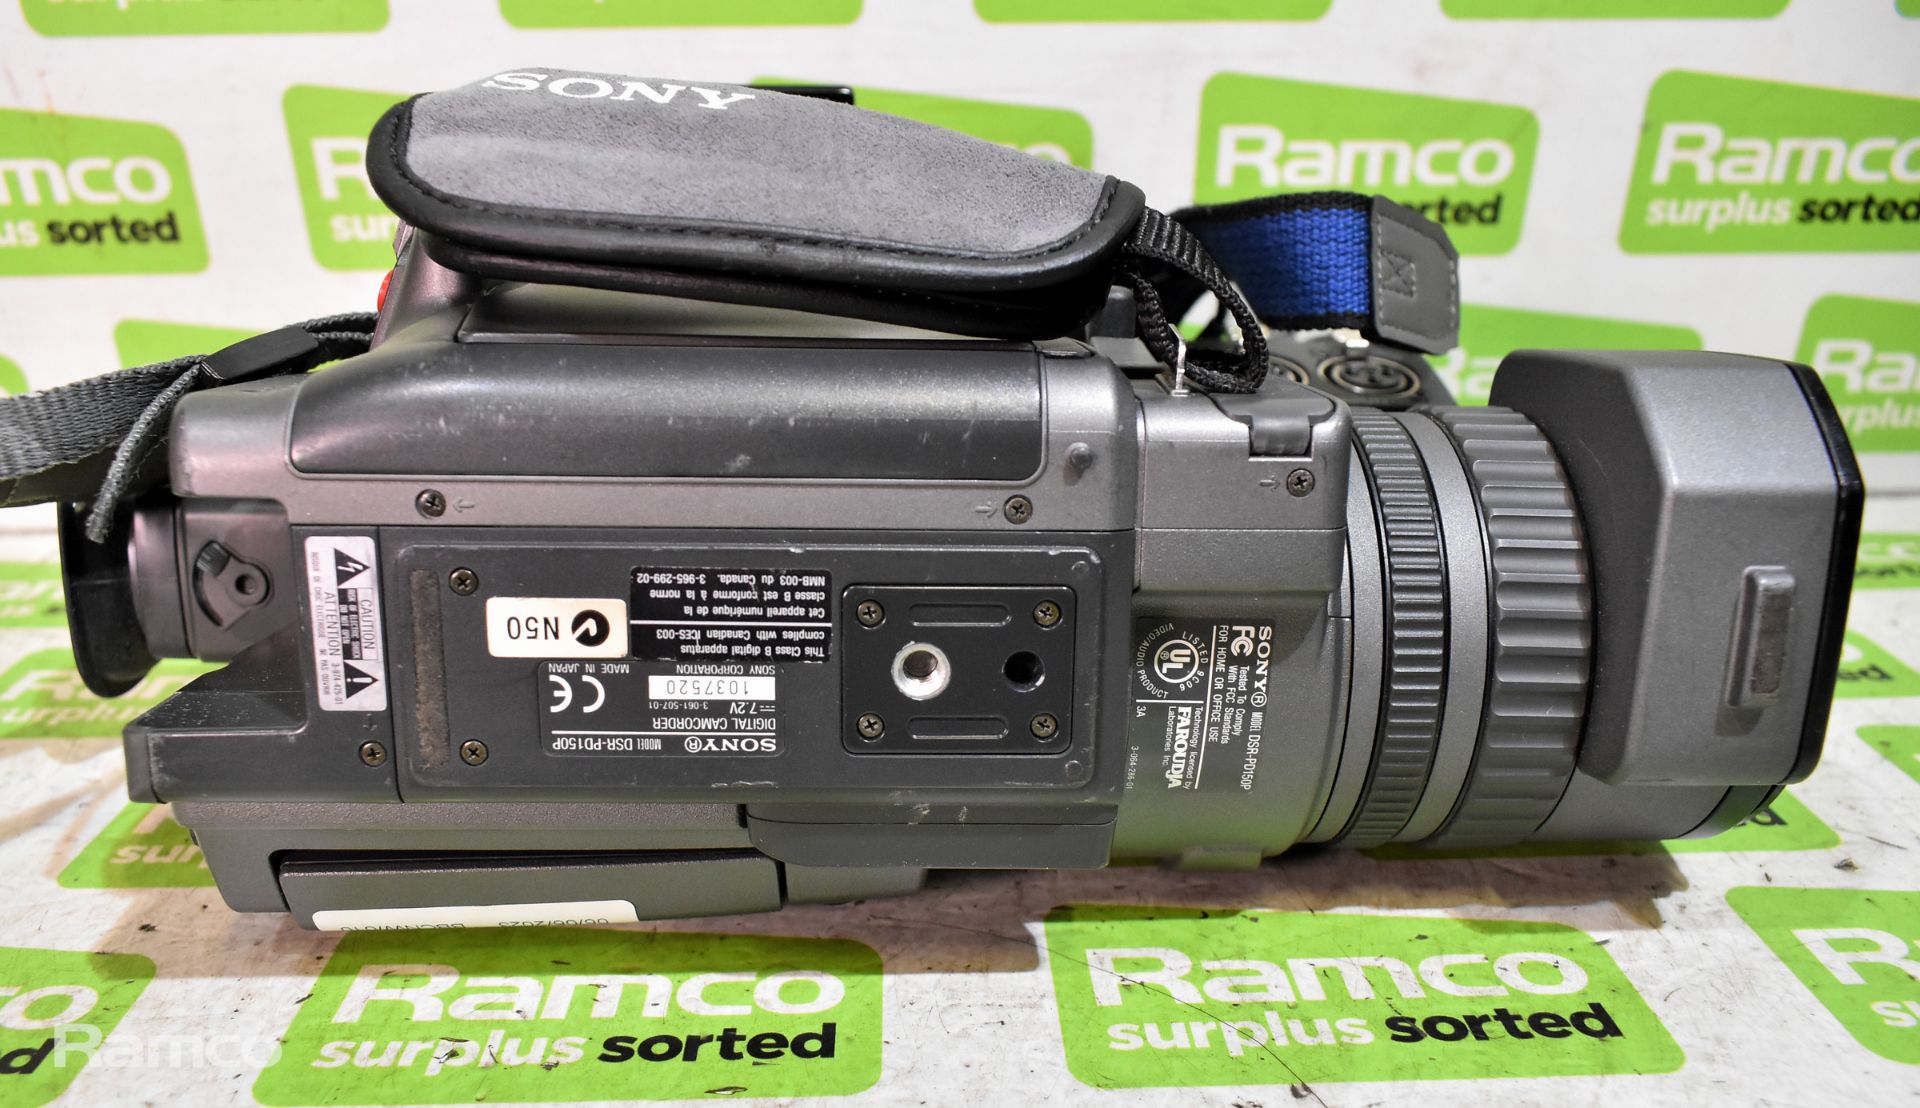 Sony DSR-PD150P digital camcorder - NO BATTERY - Image 6 of 7